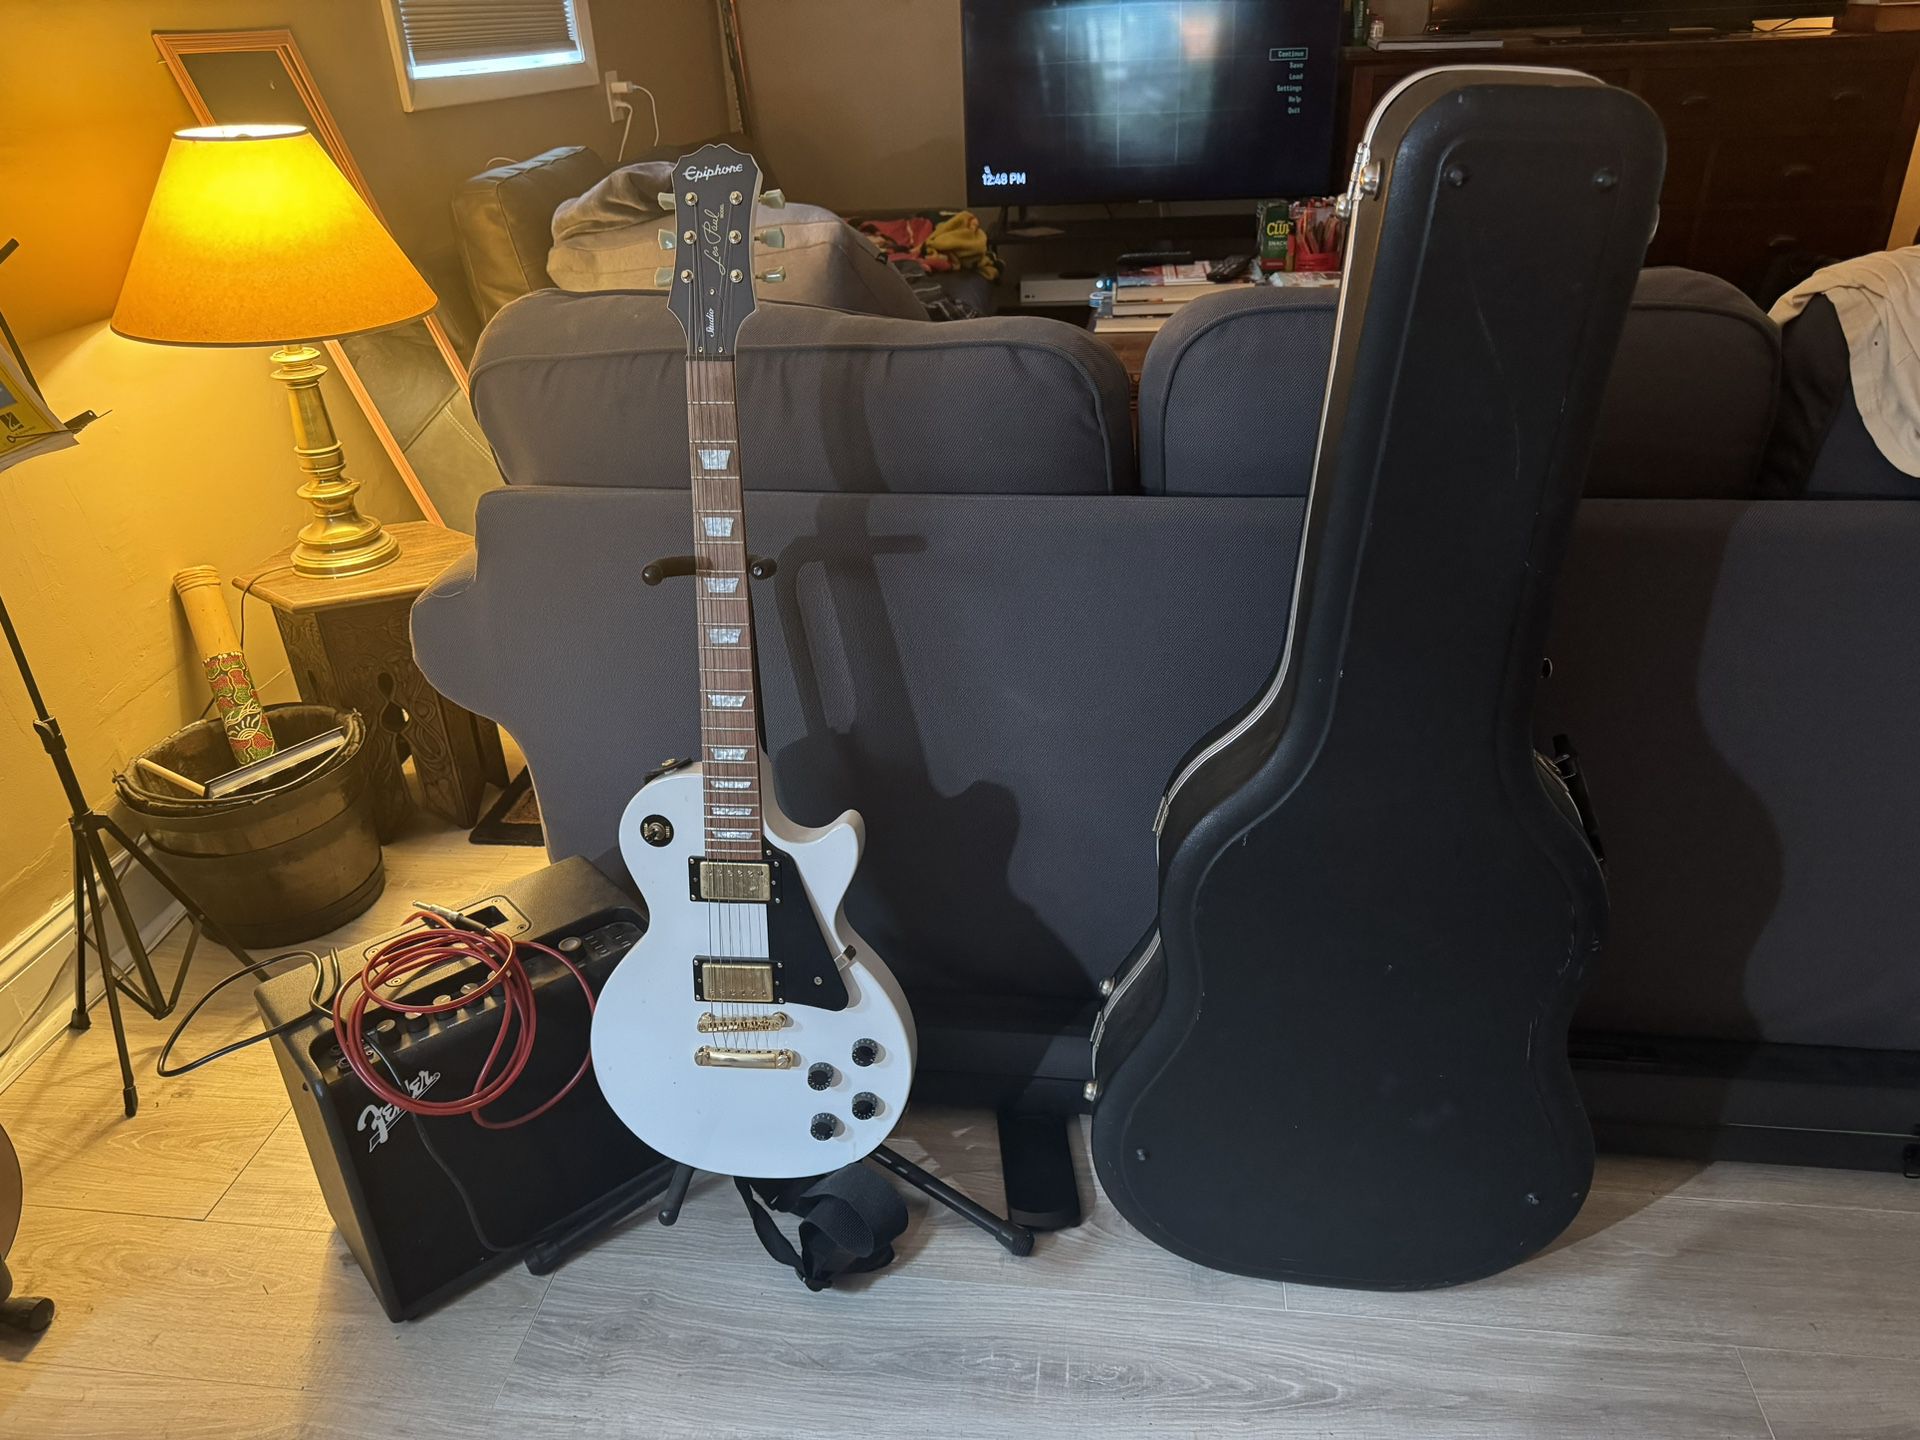 Guitar, Amp, Case, and Stand